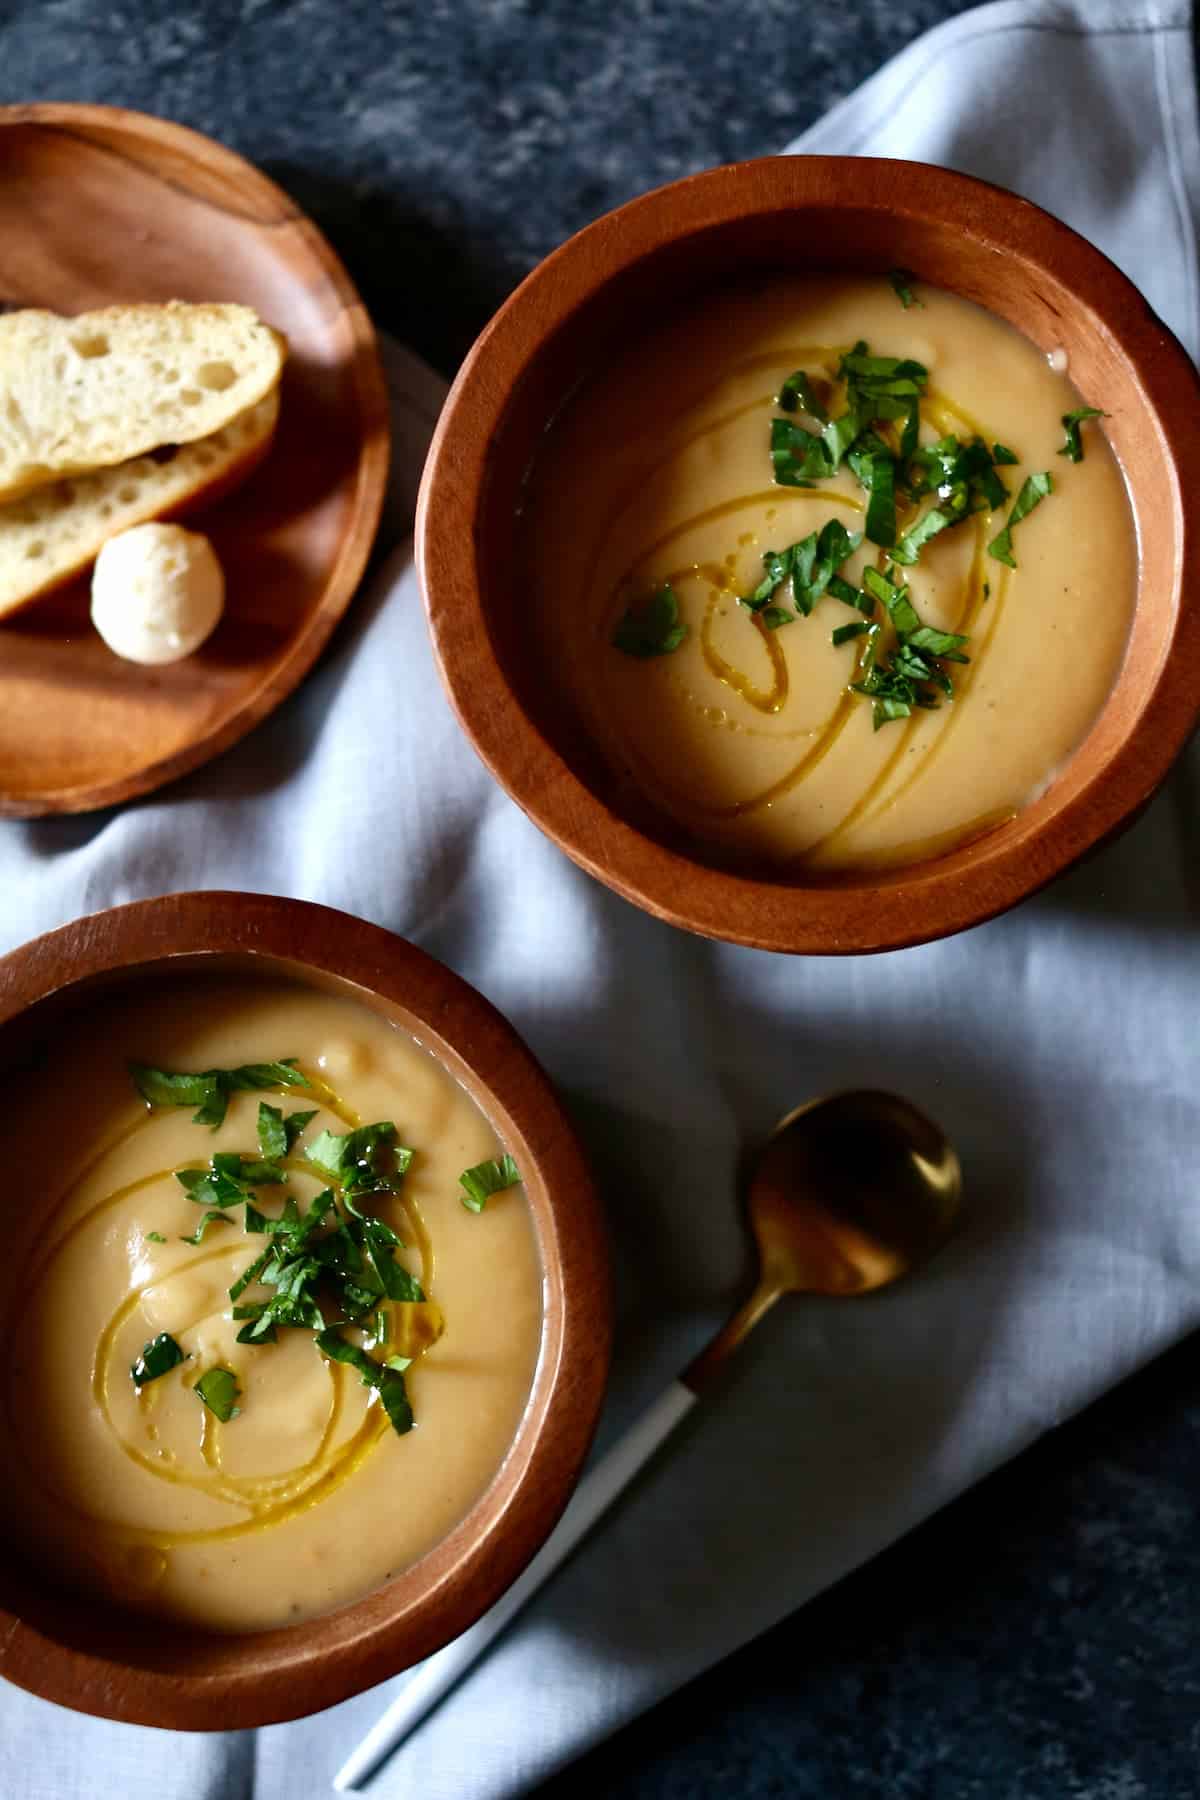 a close up photo of two bowls of soup.